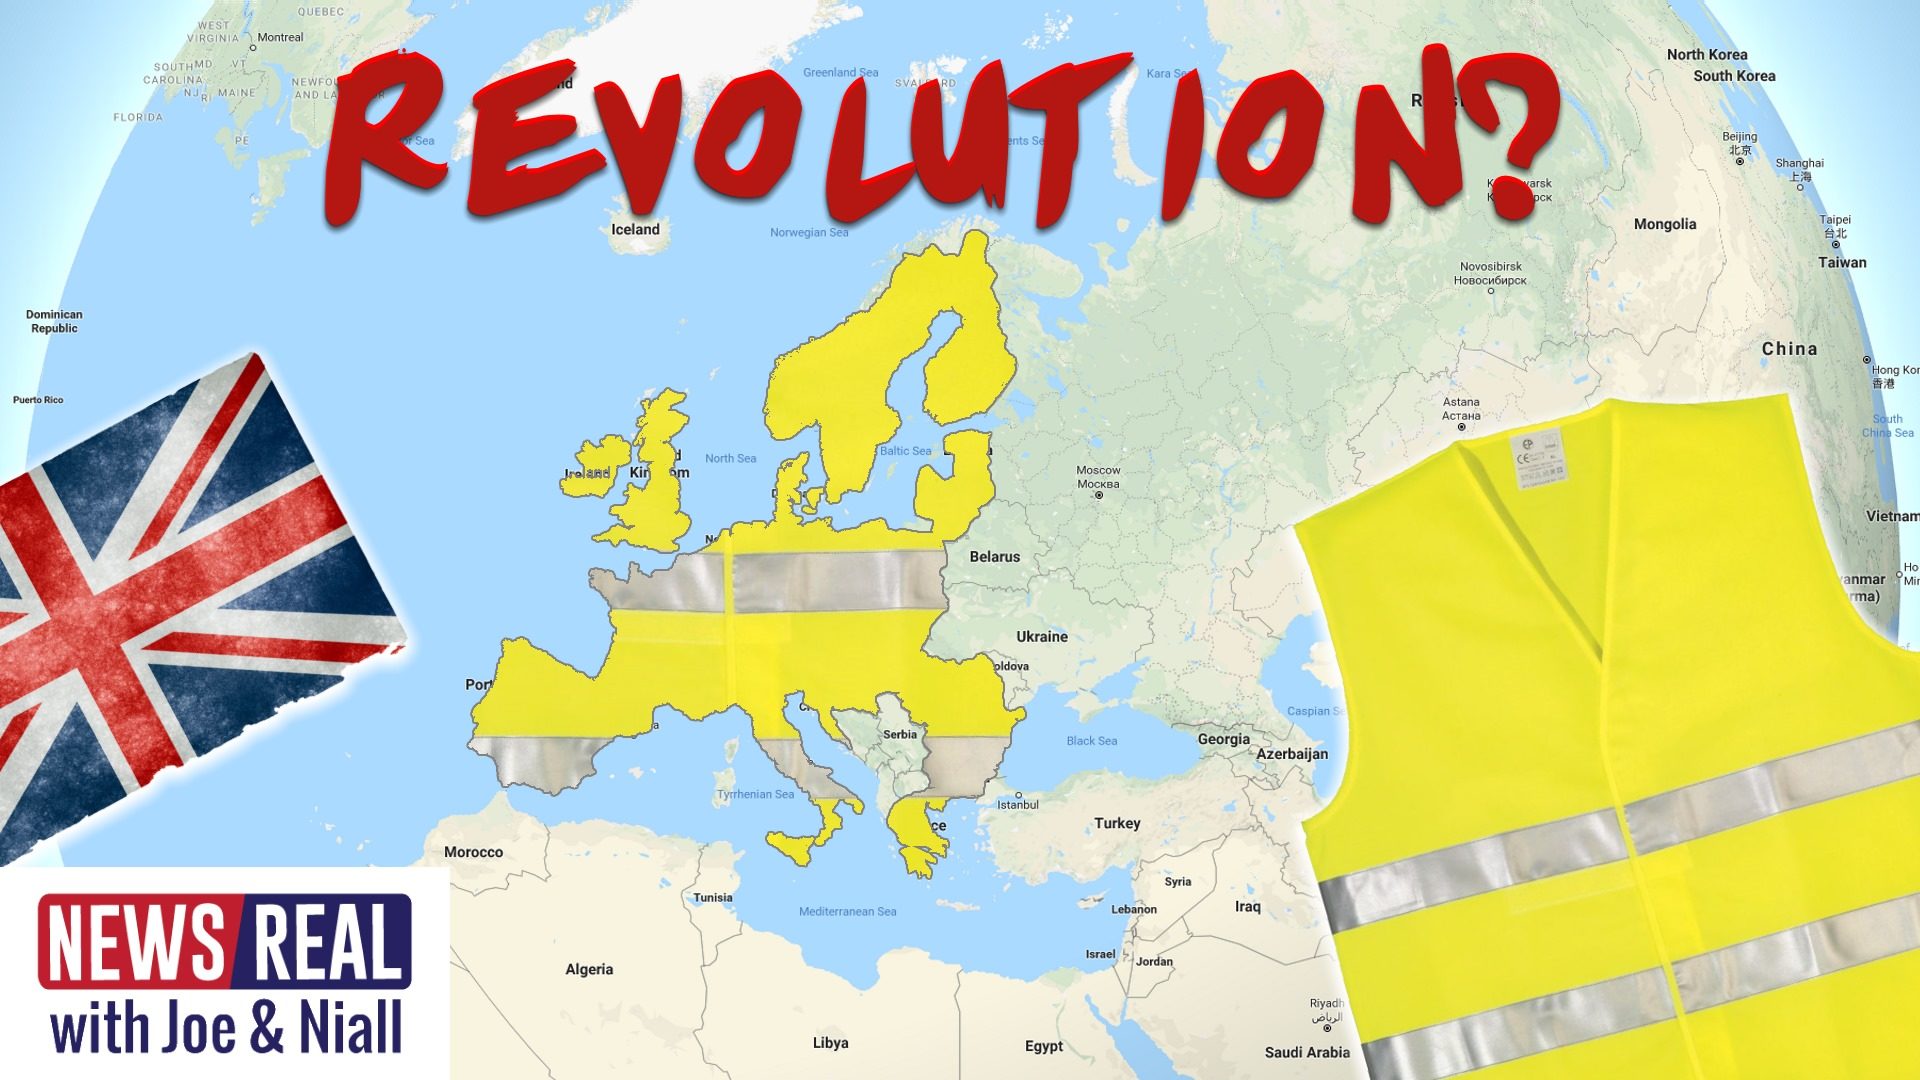 newsreal yellow vests brexit